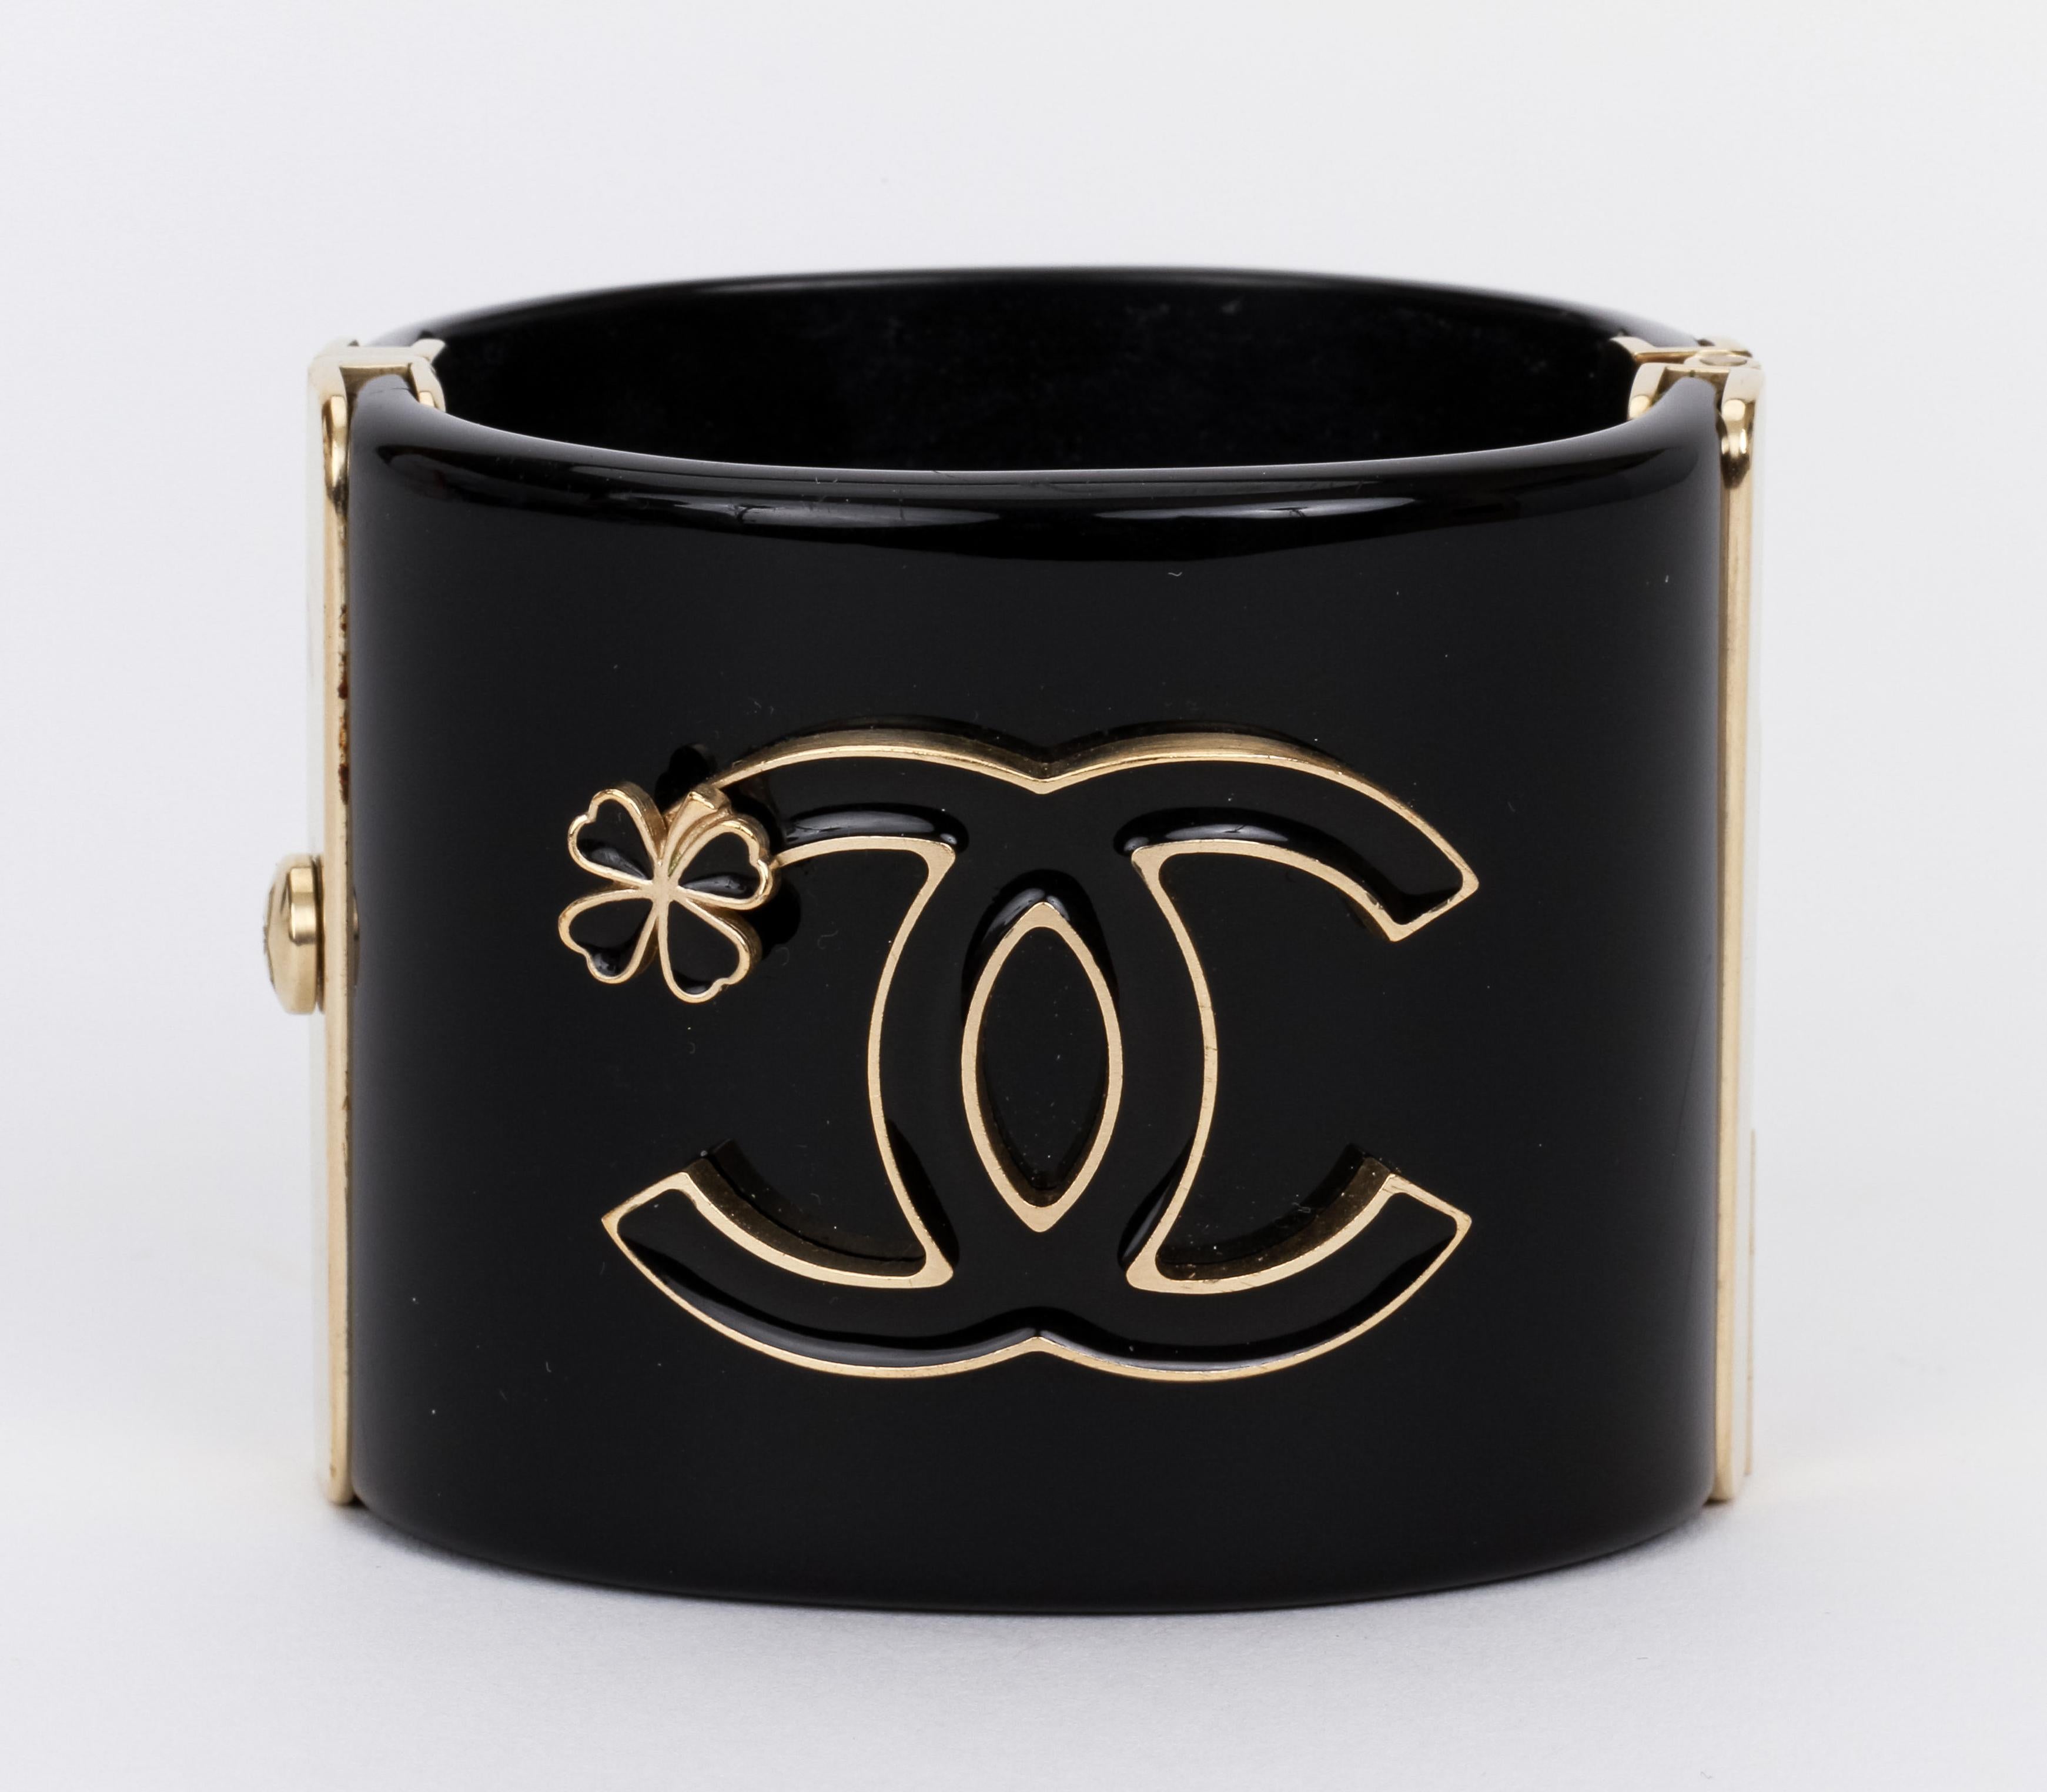 Important Chanel black lucite hinged oval cuff, CC logo with clover. Comes with original box.
